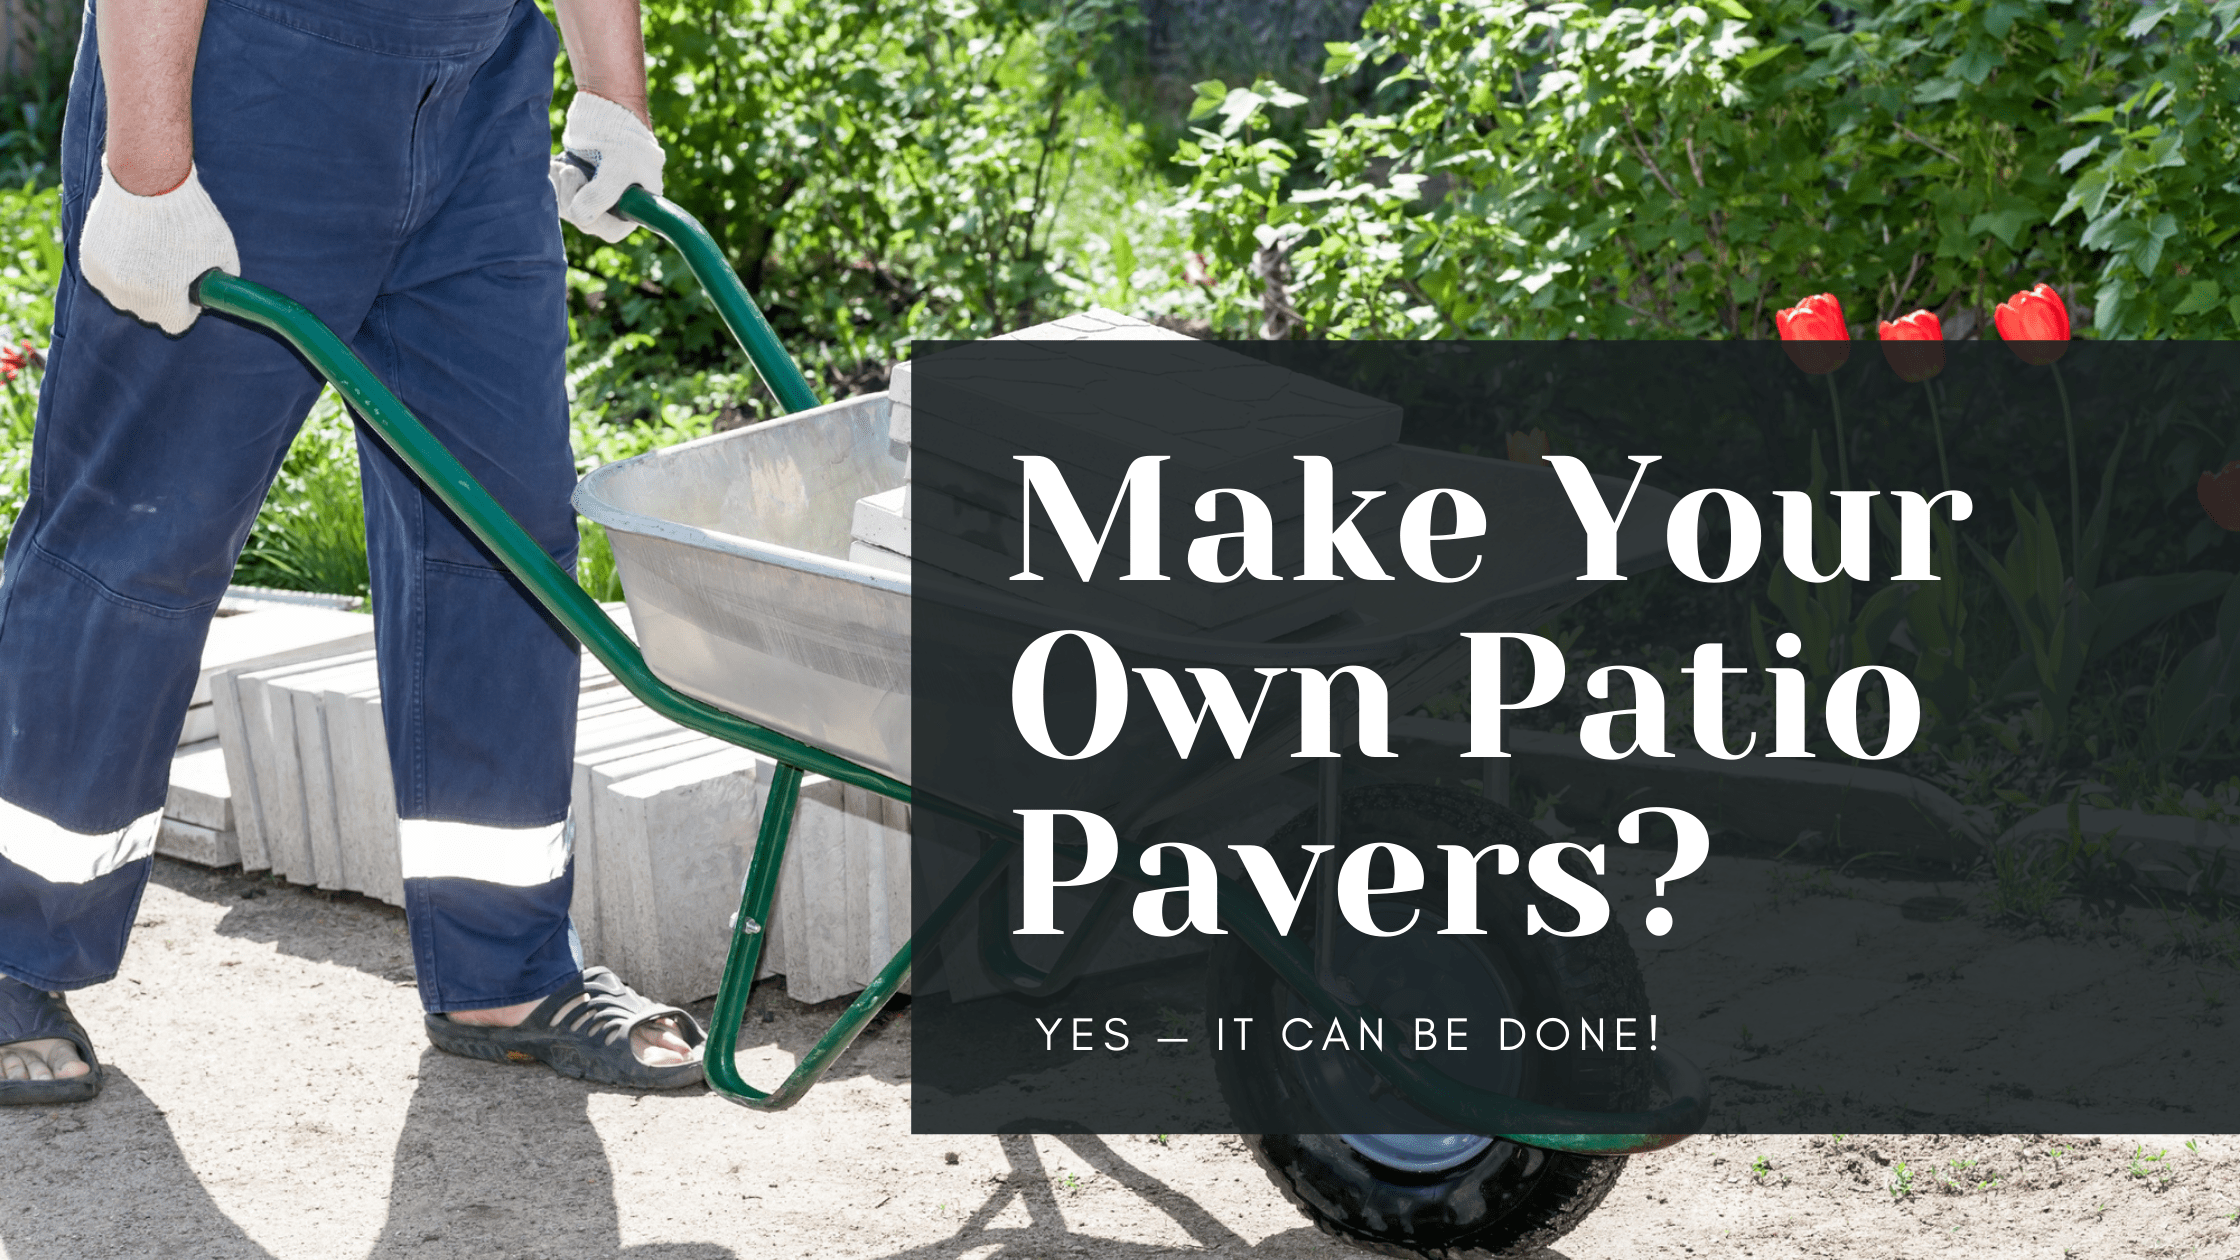 How to Make Homemade Patio Pavers (It’s not as hard as you think)